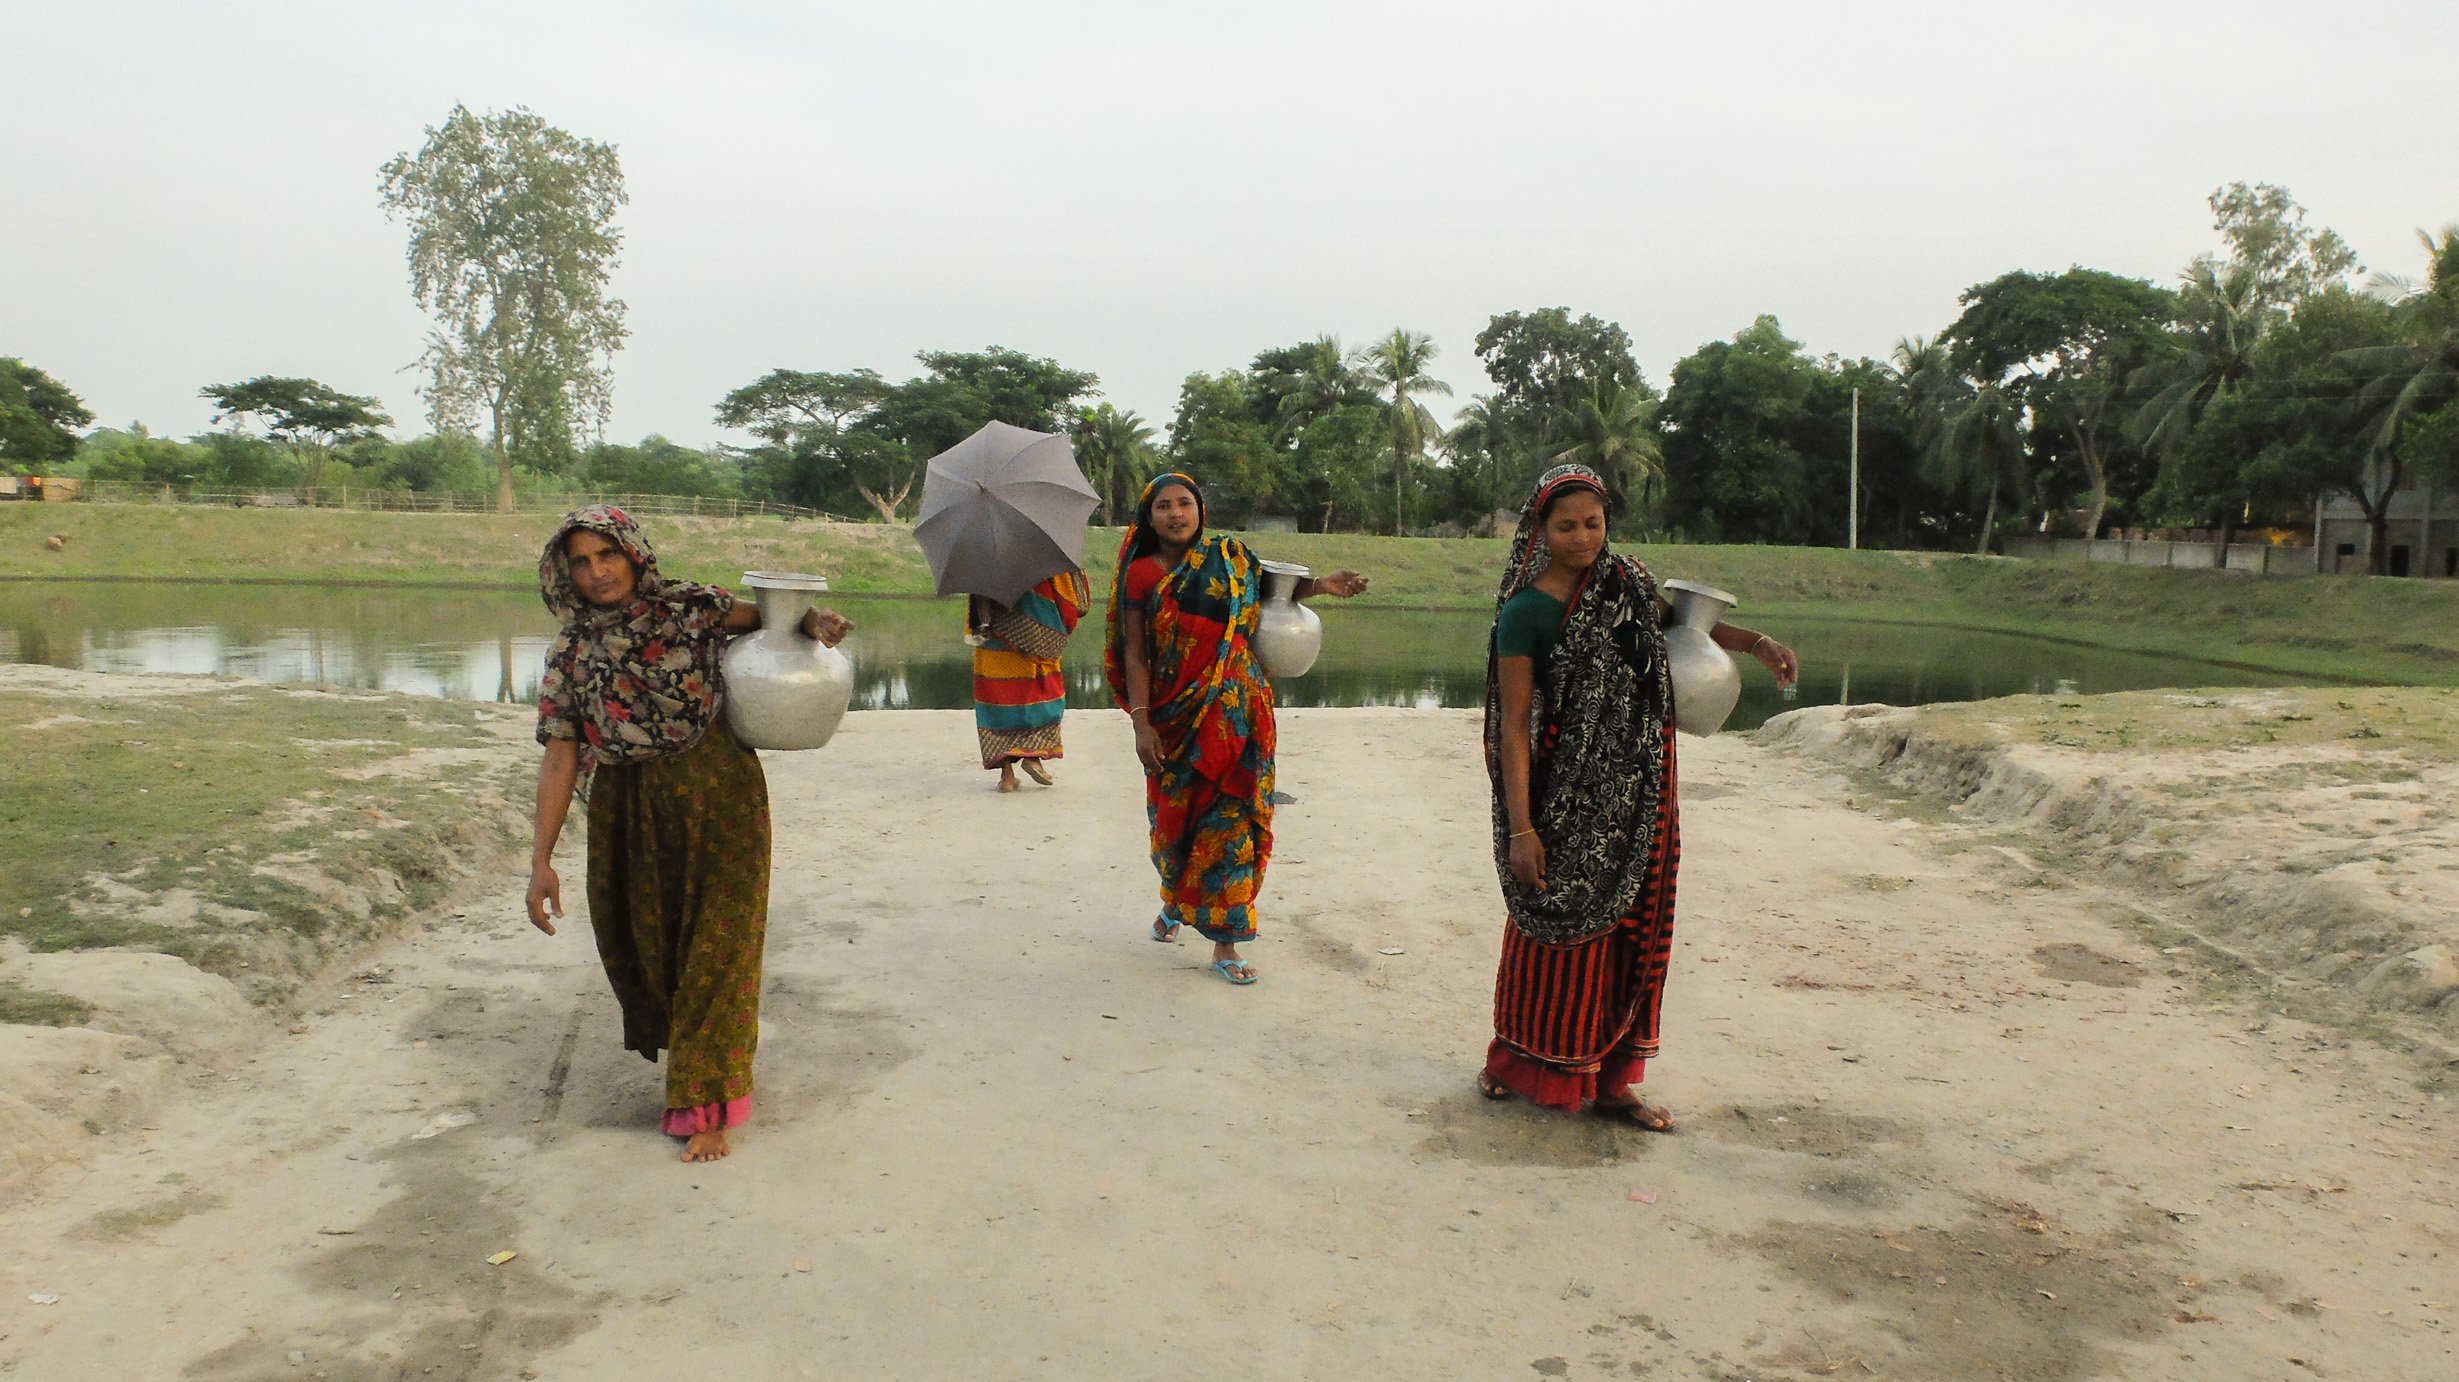 Womenfolks in rural Bangladesh returning home after collecting water from a pond